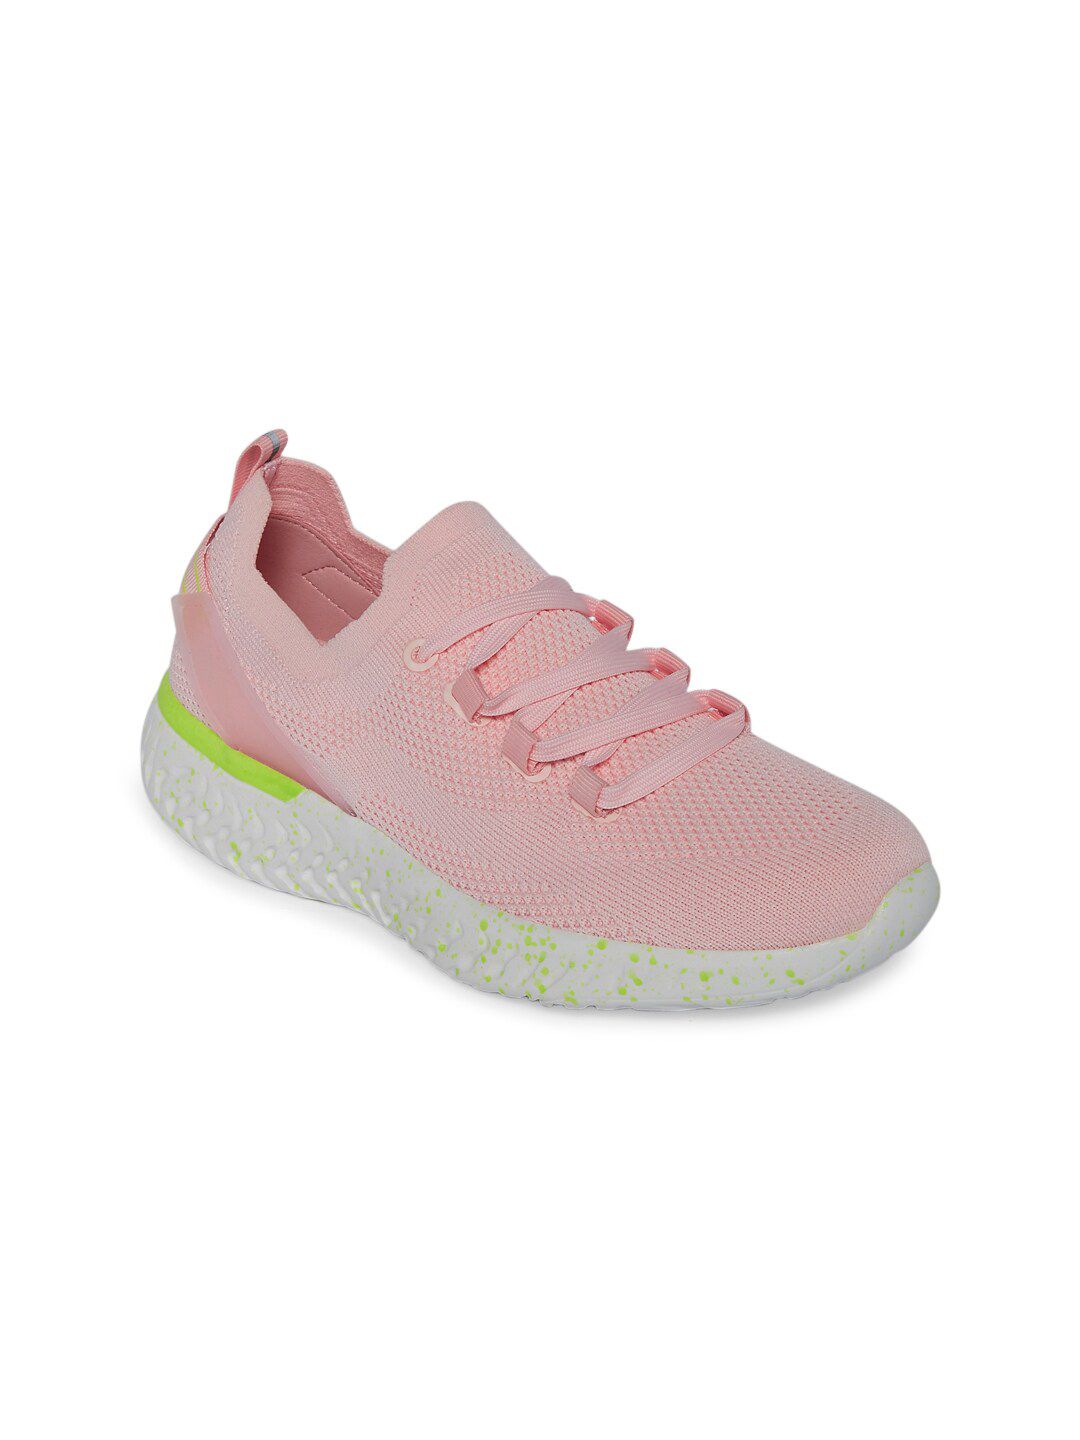 Forever Glam by Pantaloons Women Pink Running Non-Marking Shoes Price in India